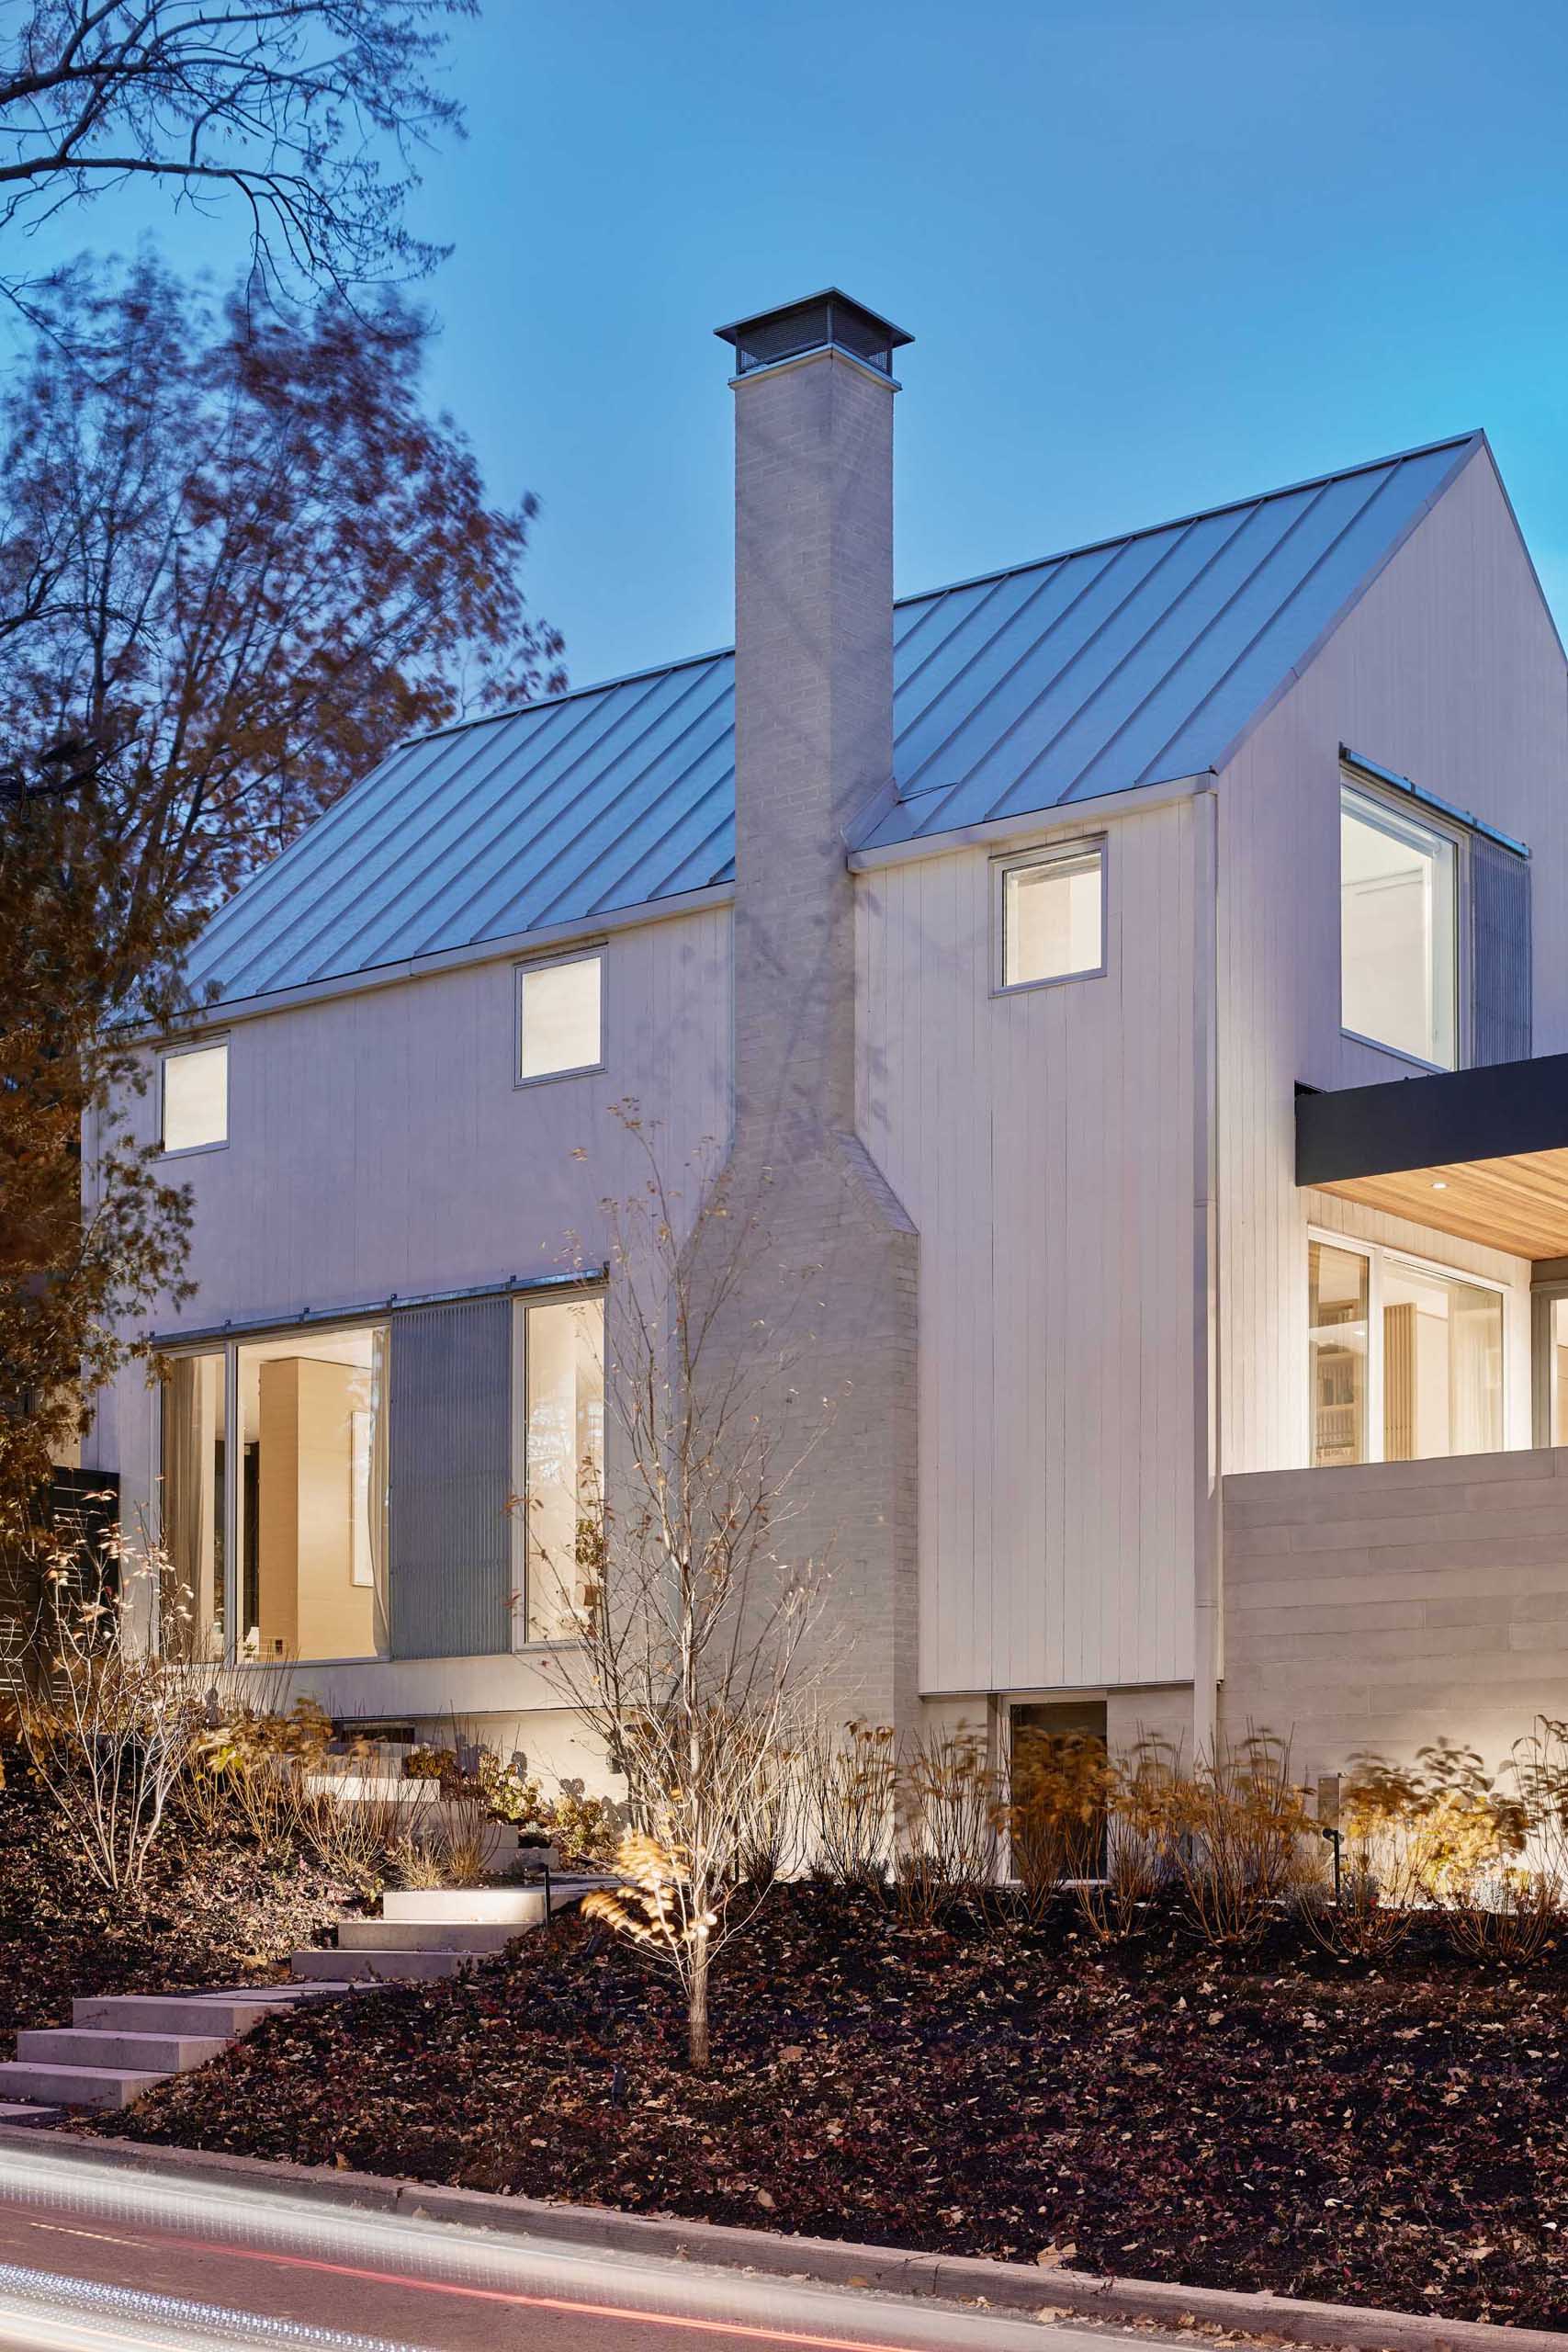 A modern farmhouse inspired home with a two-story white gabled structure and flat-roofed additions on three sides.